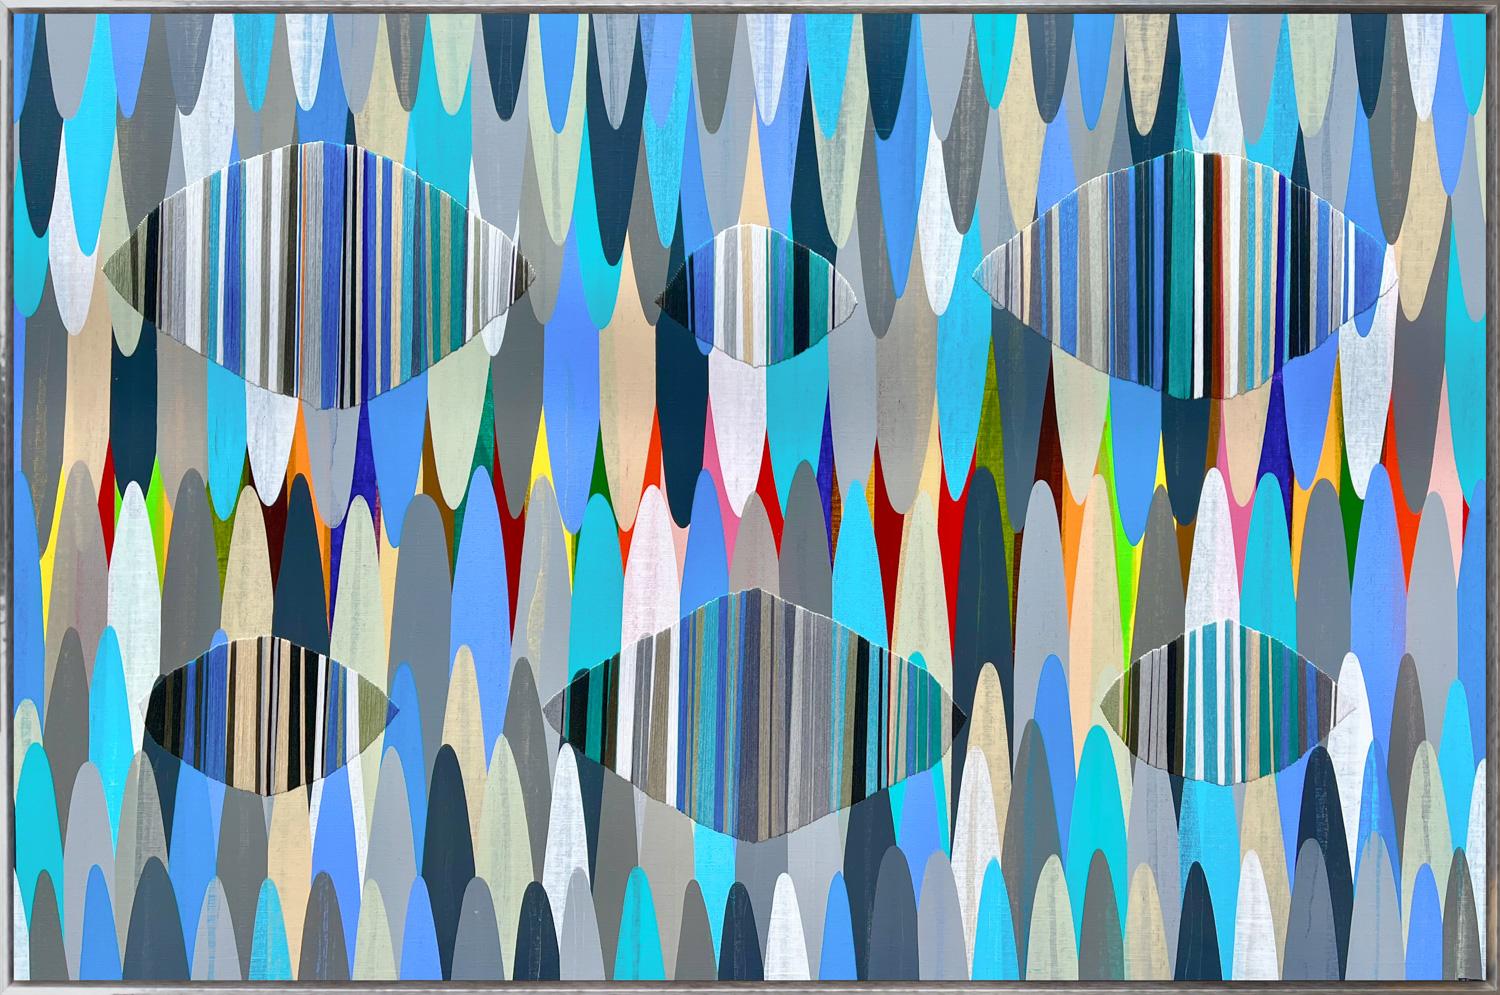 "Poemes CXXX" Contemporary Abstract Embroidered Mixed Media on Canvas with Frame - Mixed Media Art by Raul de la Torre